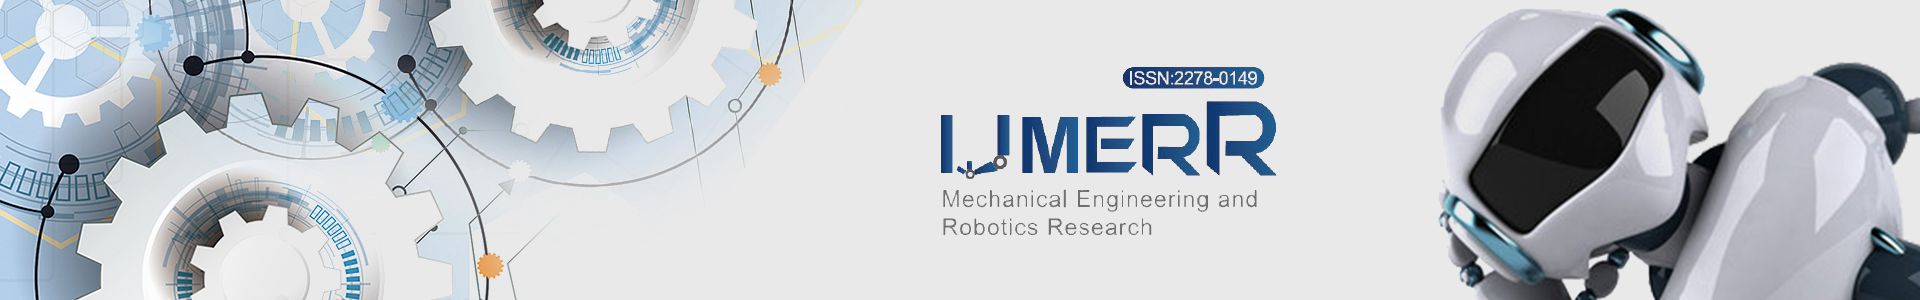 journal of mechanical engineering research impact factor